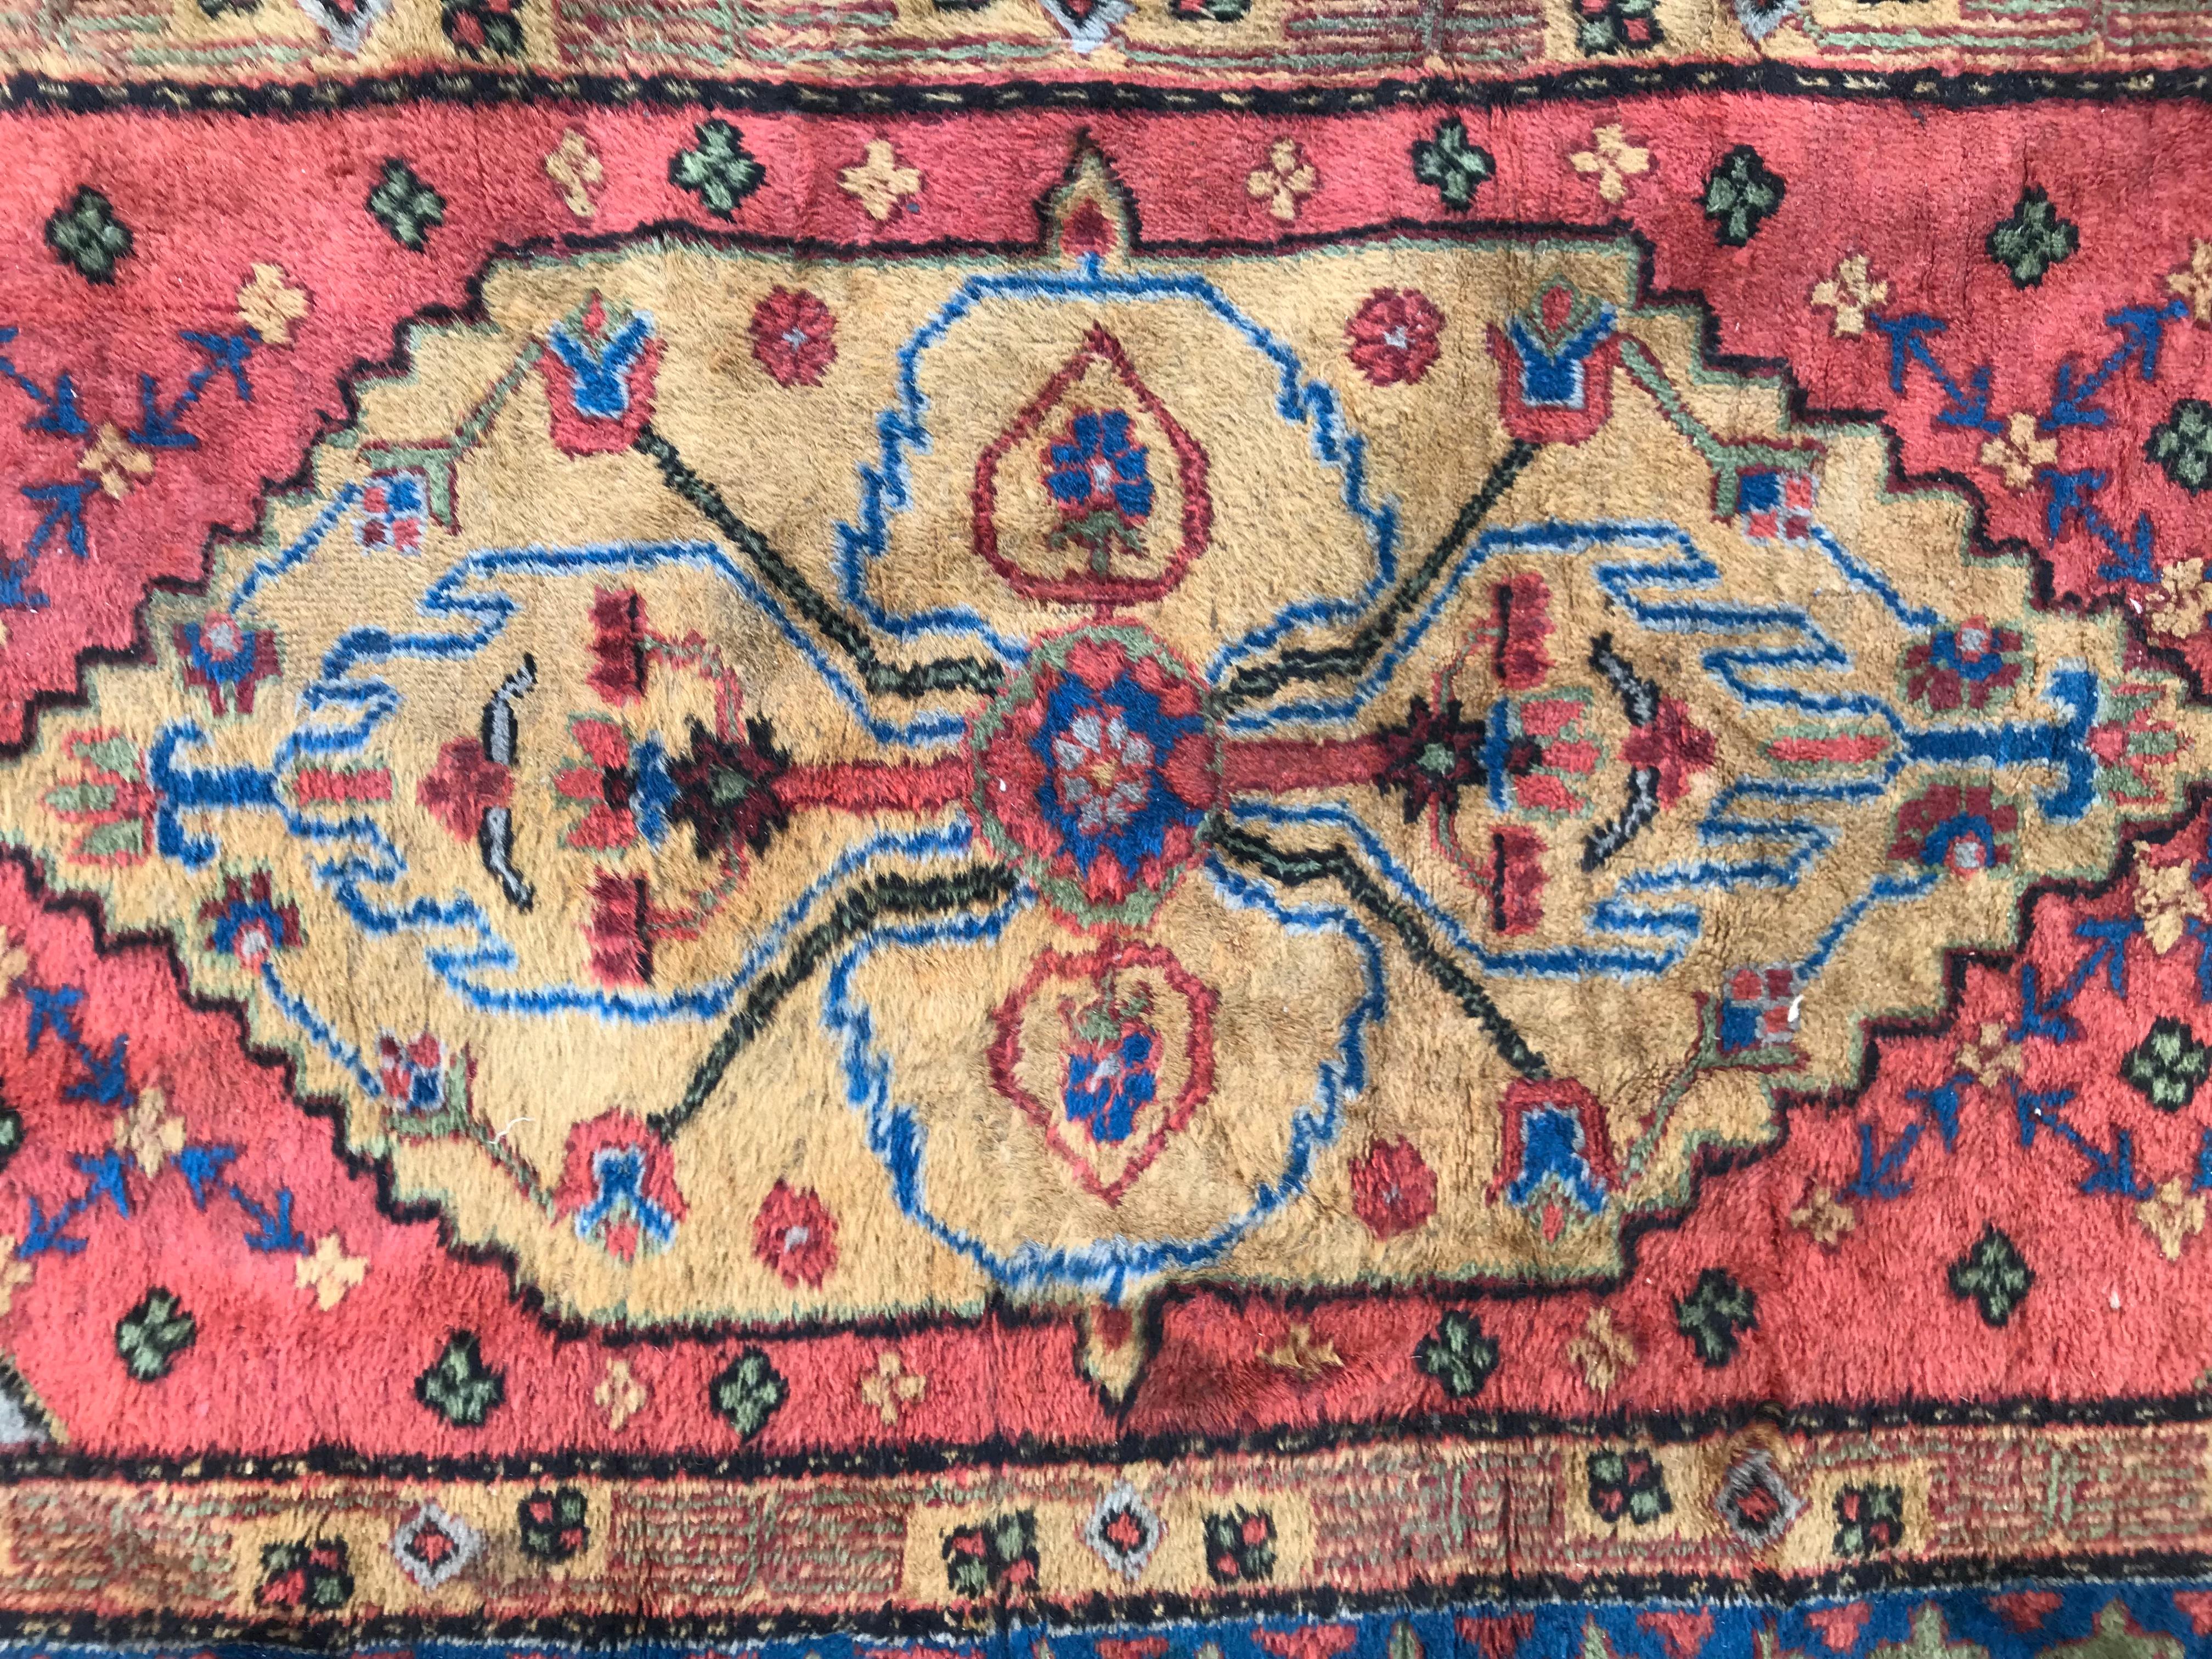 Little Vintage Sinkiang Rug, Antique Persian Style Rugs, 20th Century Carpets 4